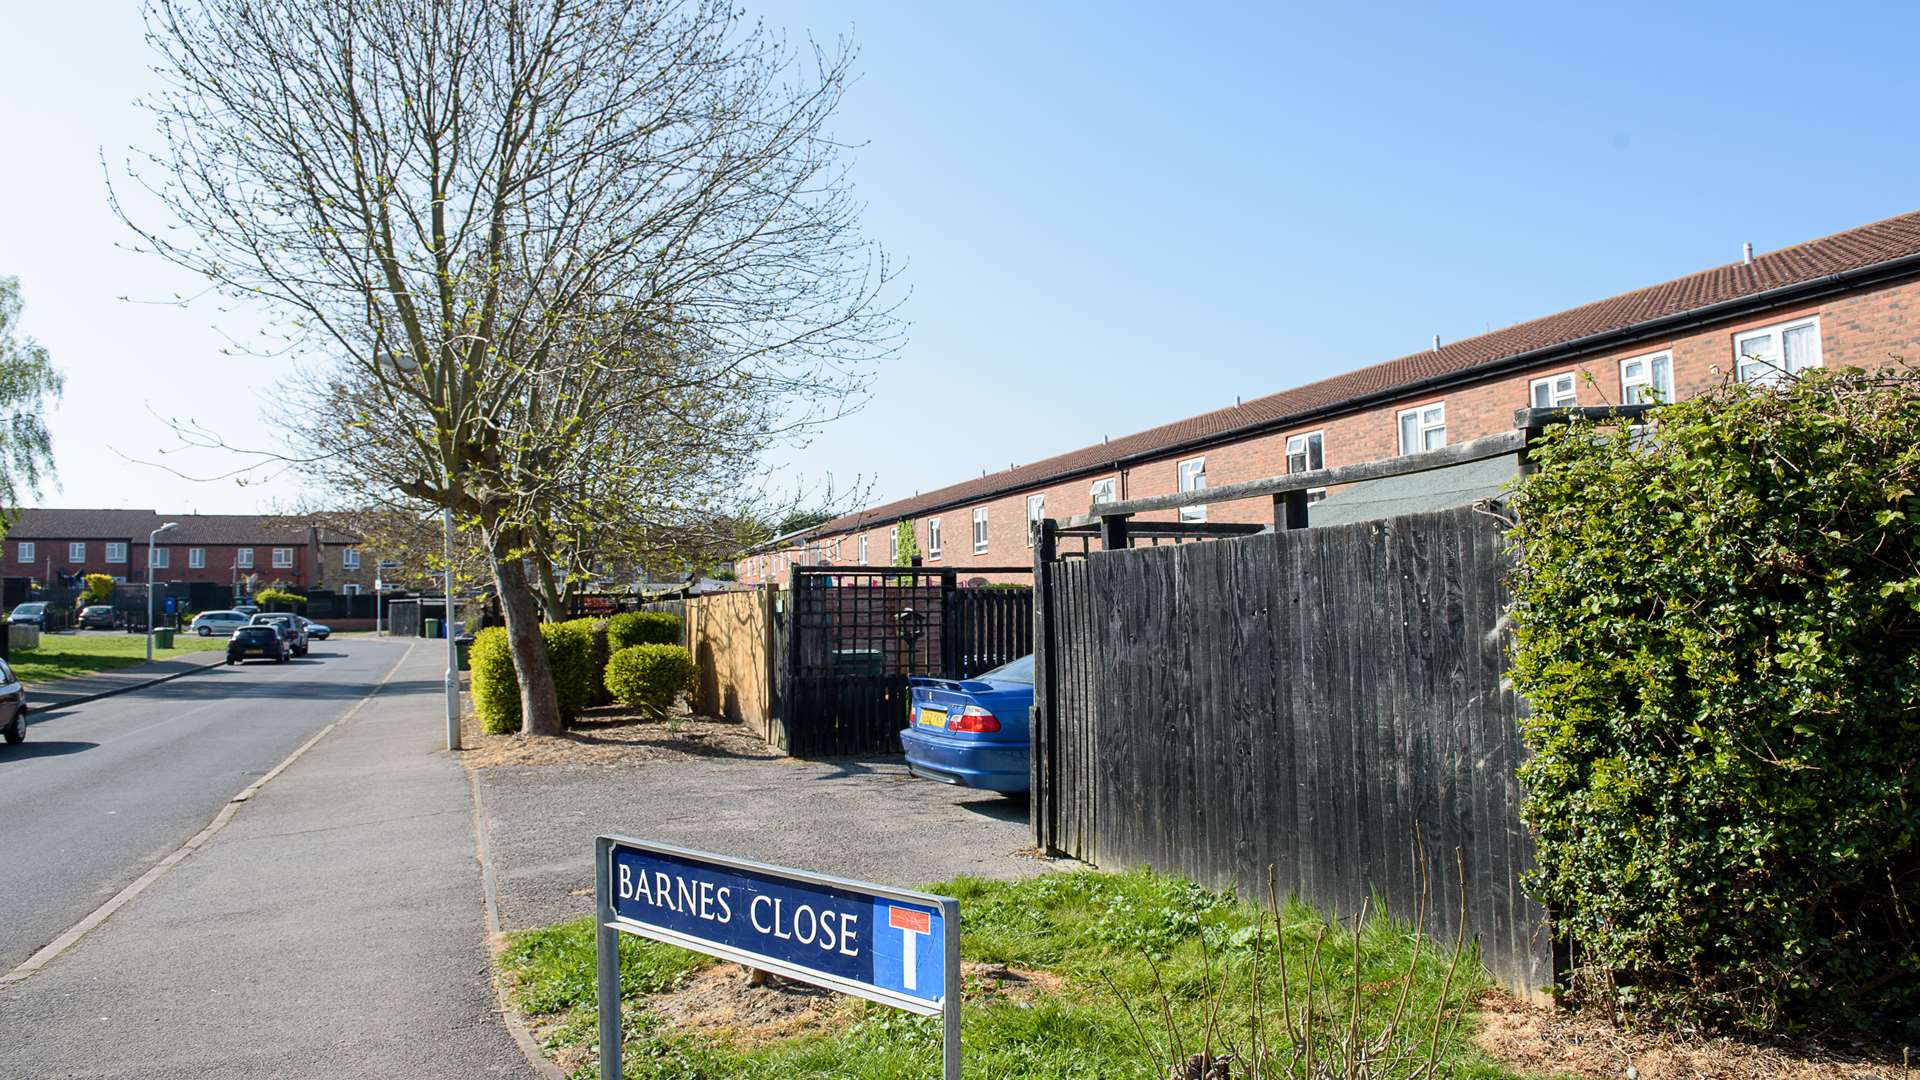 Barnes Close, Faversham, where the incident allegedly took place